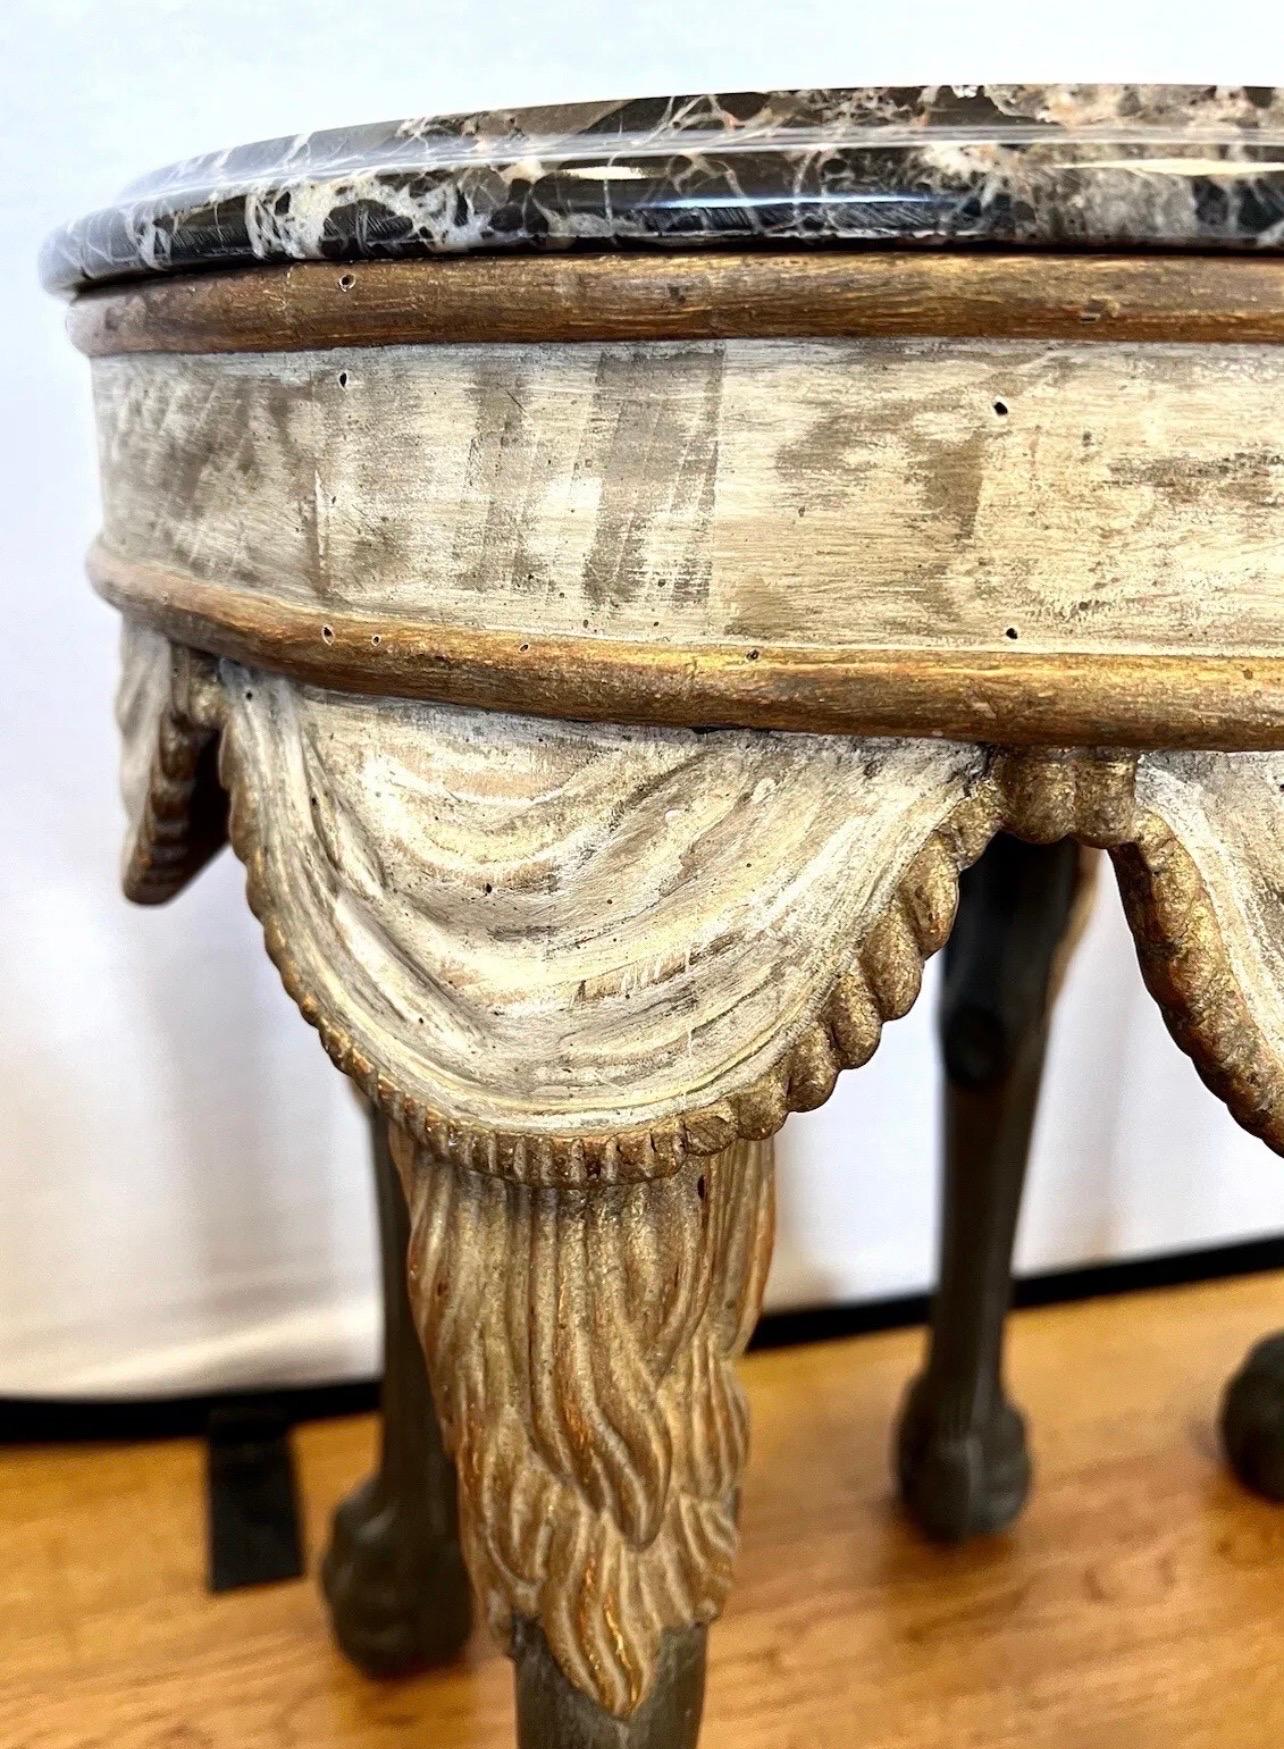 Elegant Neapolitan style table or stool with the round marble top on a hand carved and hand painted with  swagged fabric and stylized lions legs and paws.  The height of luxury.  Just the one, we do not have a pair.